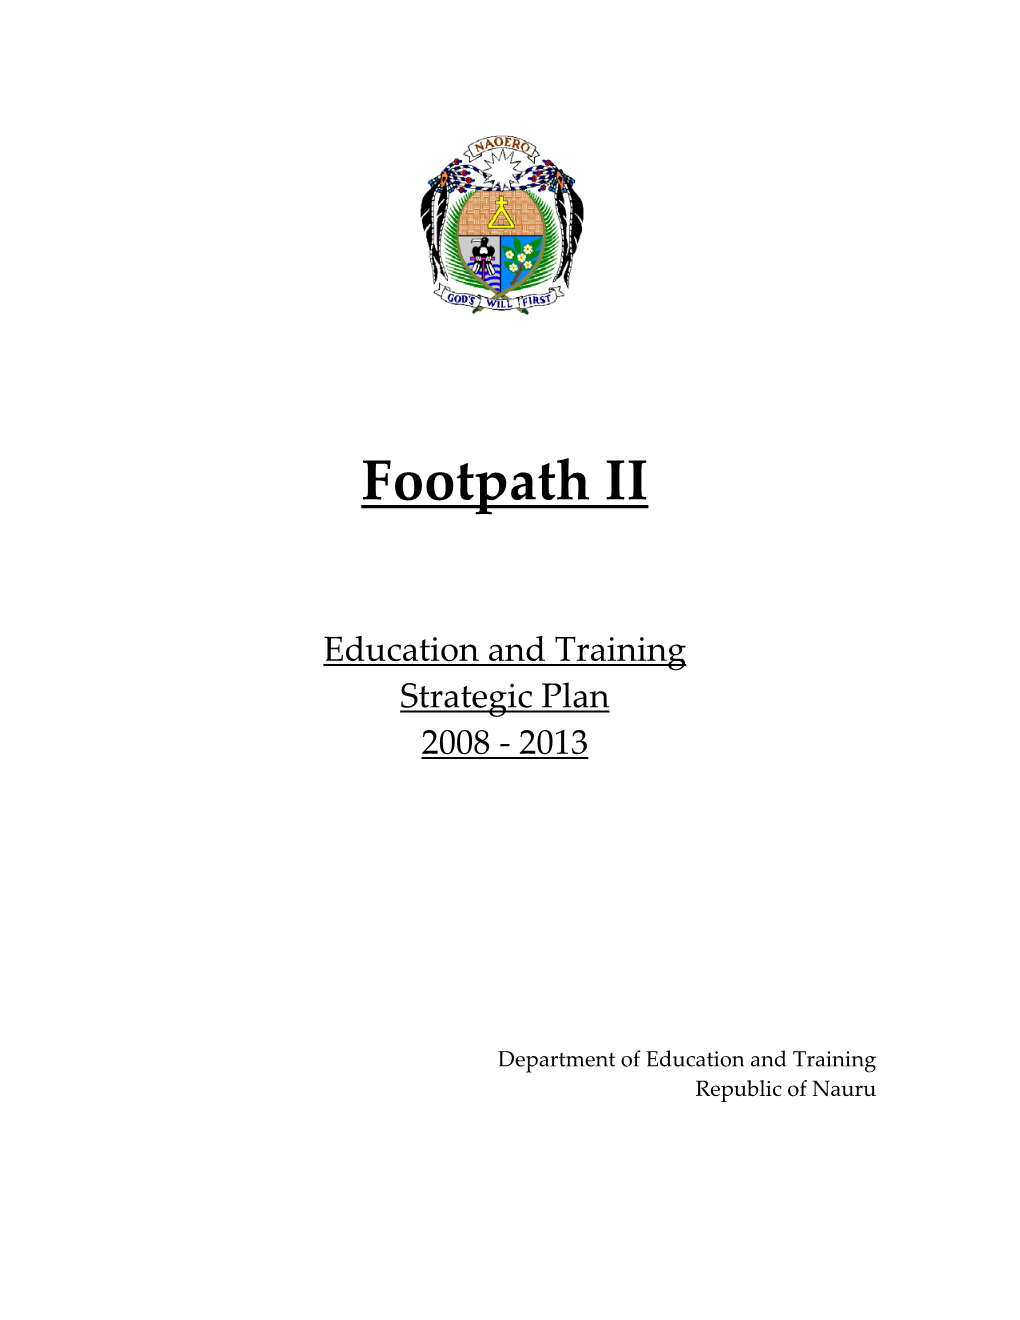 Department of Education and Training. Strategic Plan 2008 – 2013